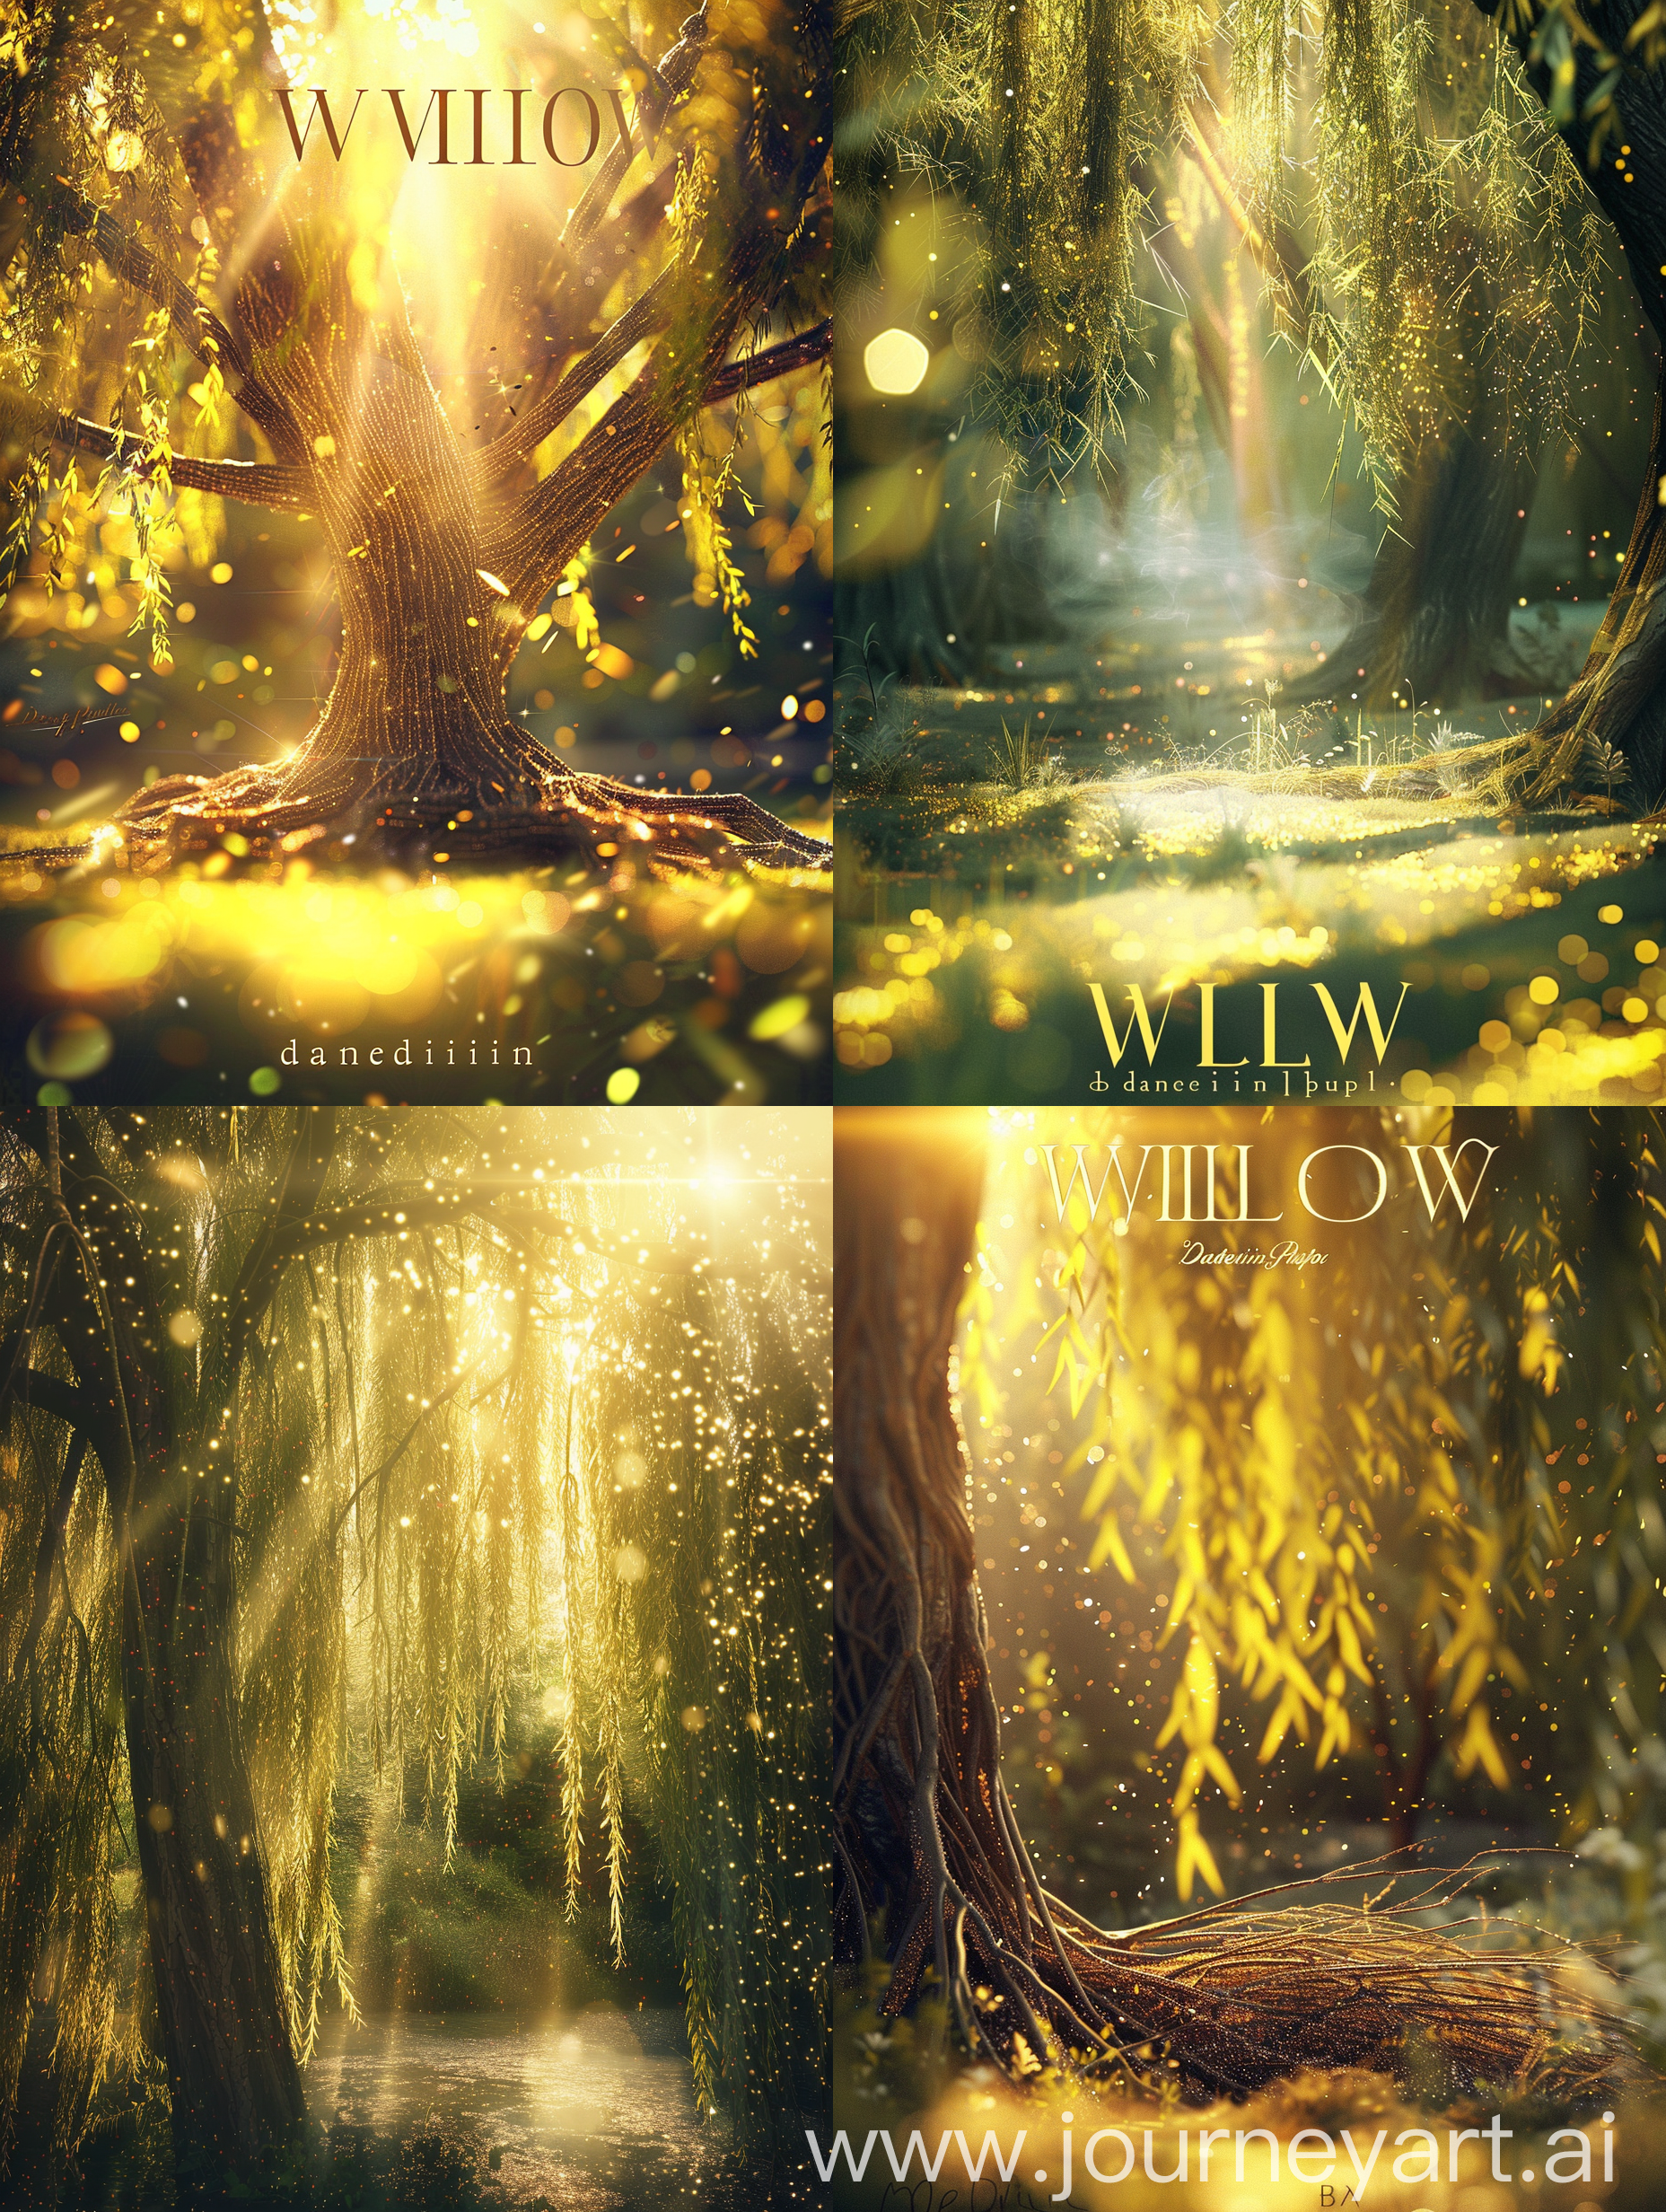 A beautiful willow with sunlight and glittery atmosphere, On the picture should be written "WILLOW by dandelioninpluto" in a fantasy font, HD, detailed